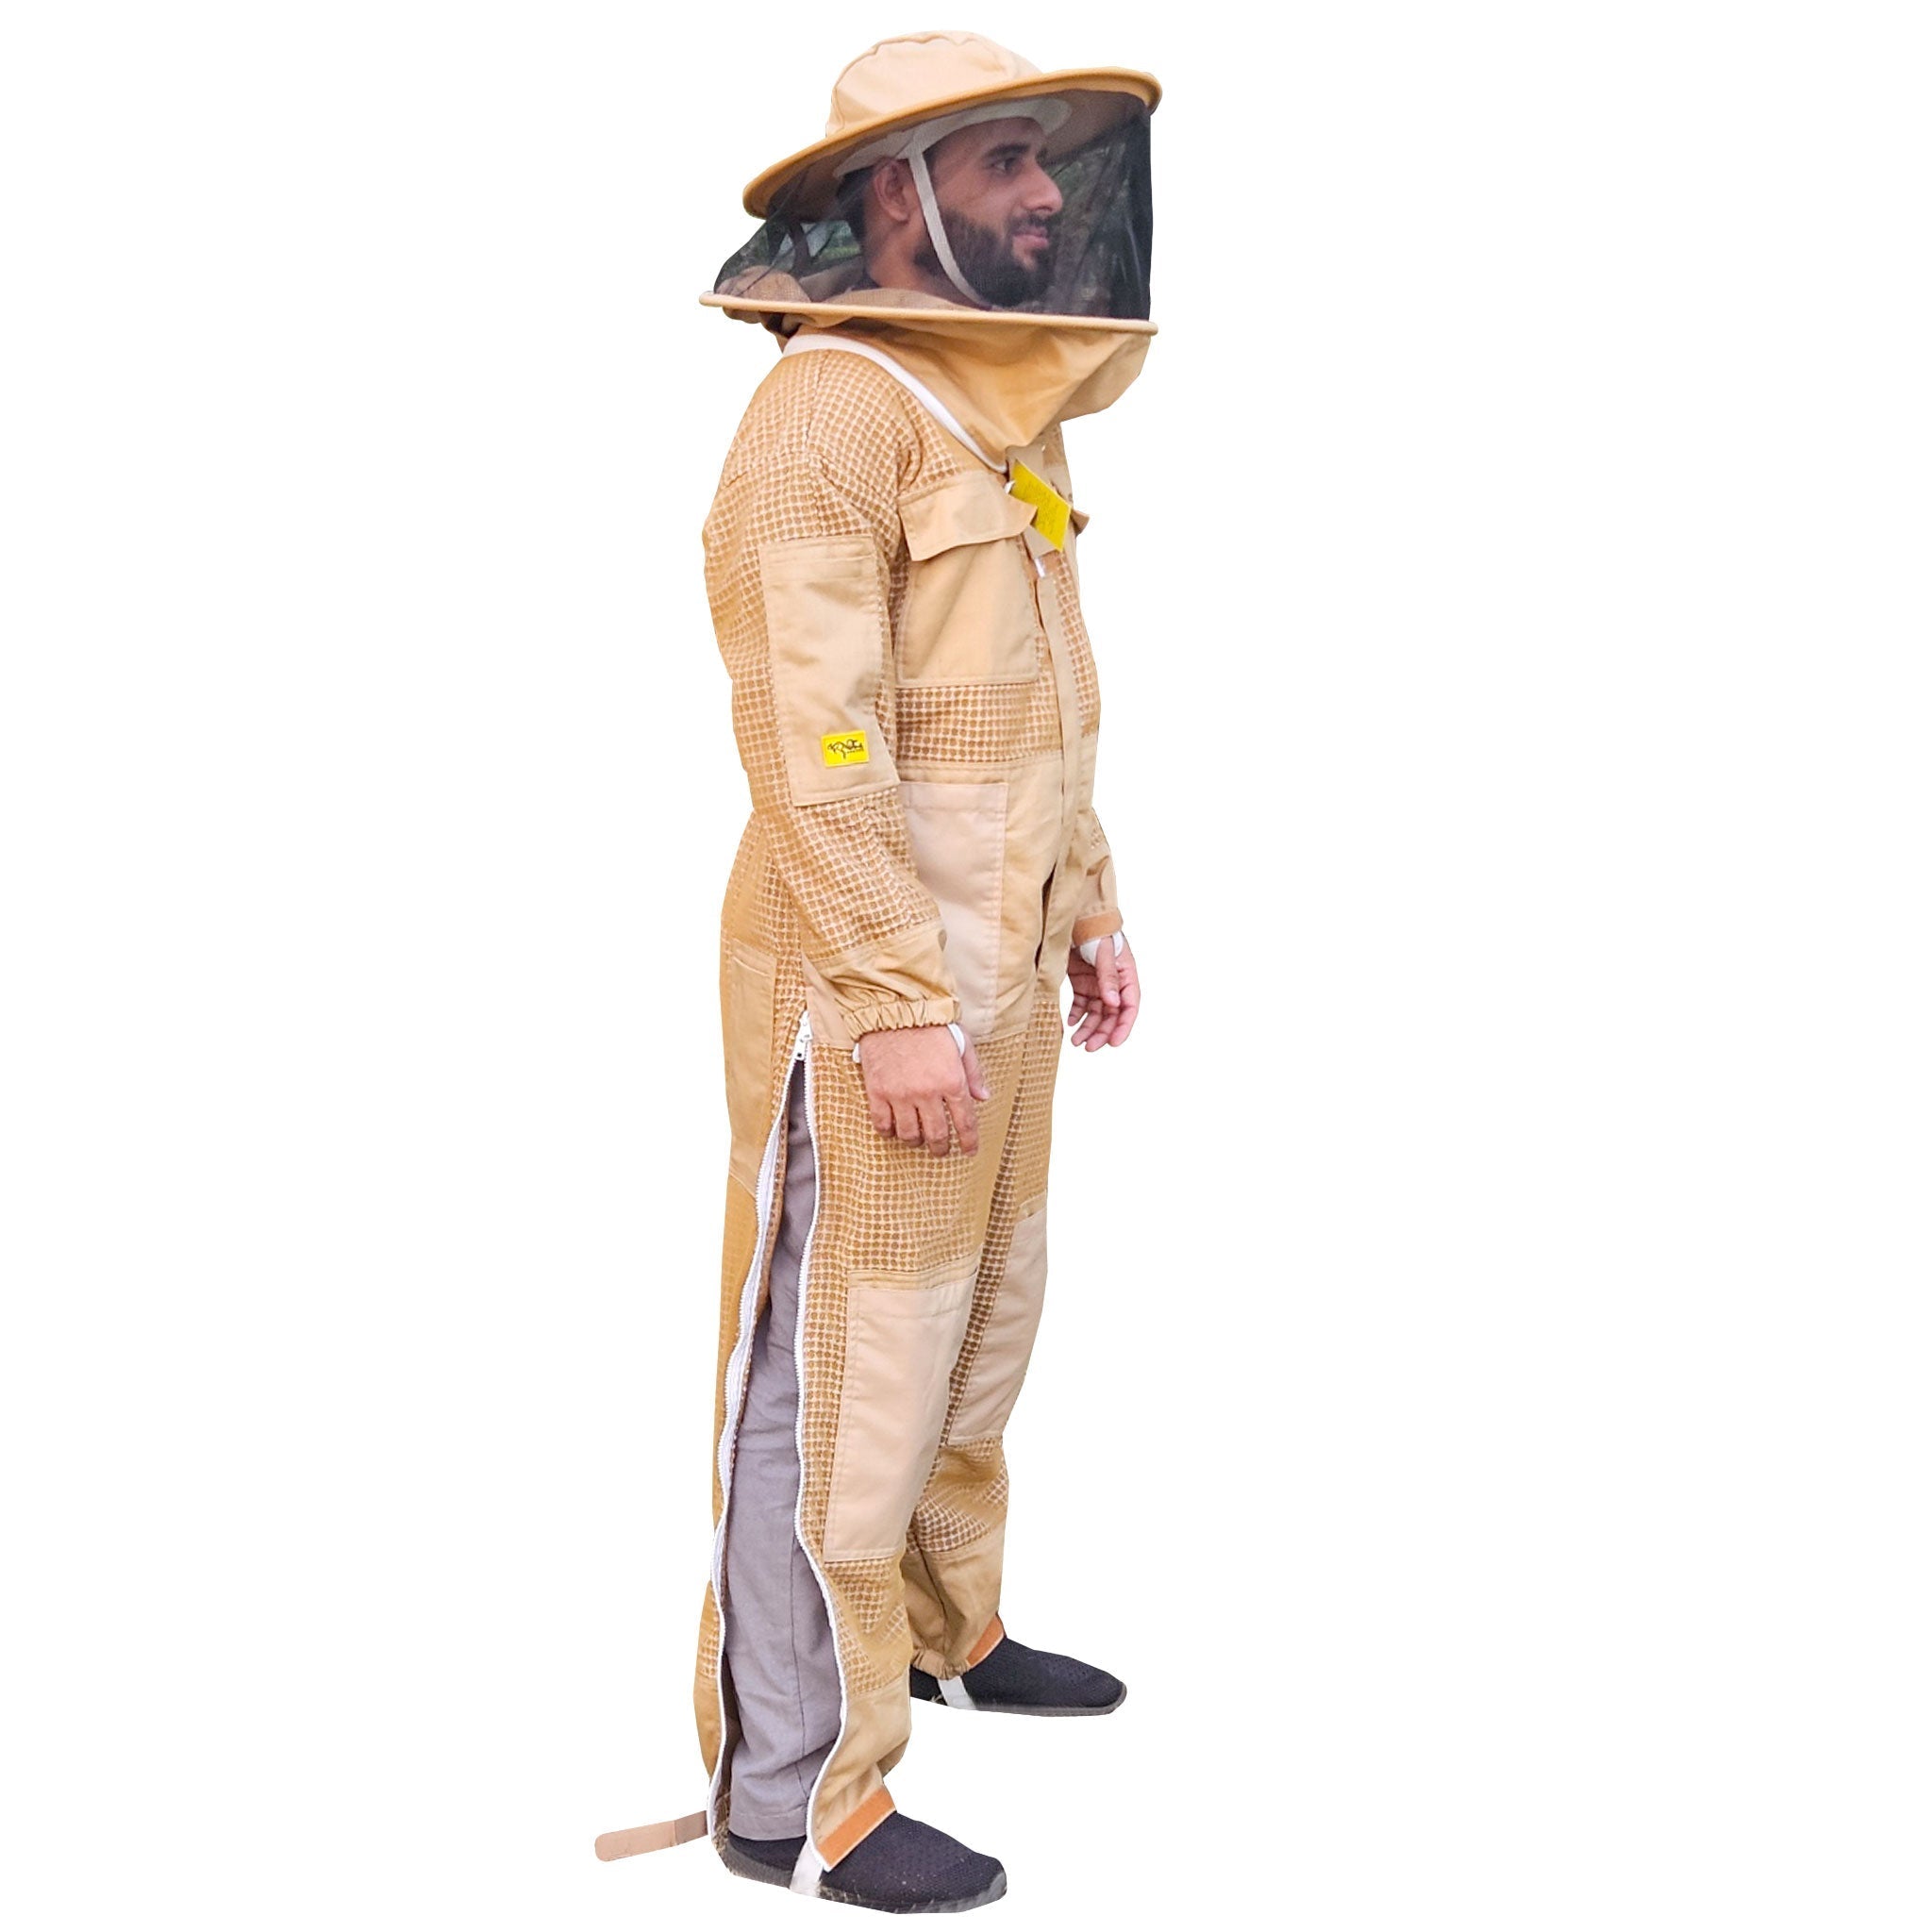 OZ ARMOUR 3 LAYER MESH VENTILATED BEEKEEPING SUIT WITH ROUND HAT